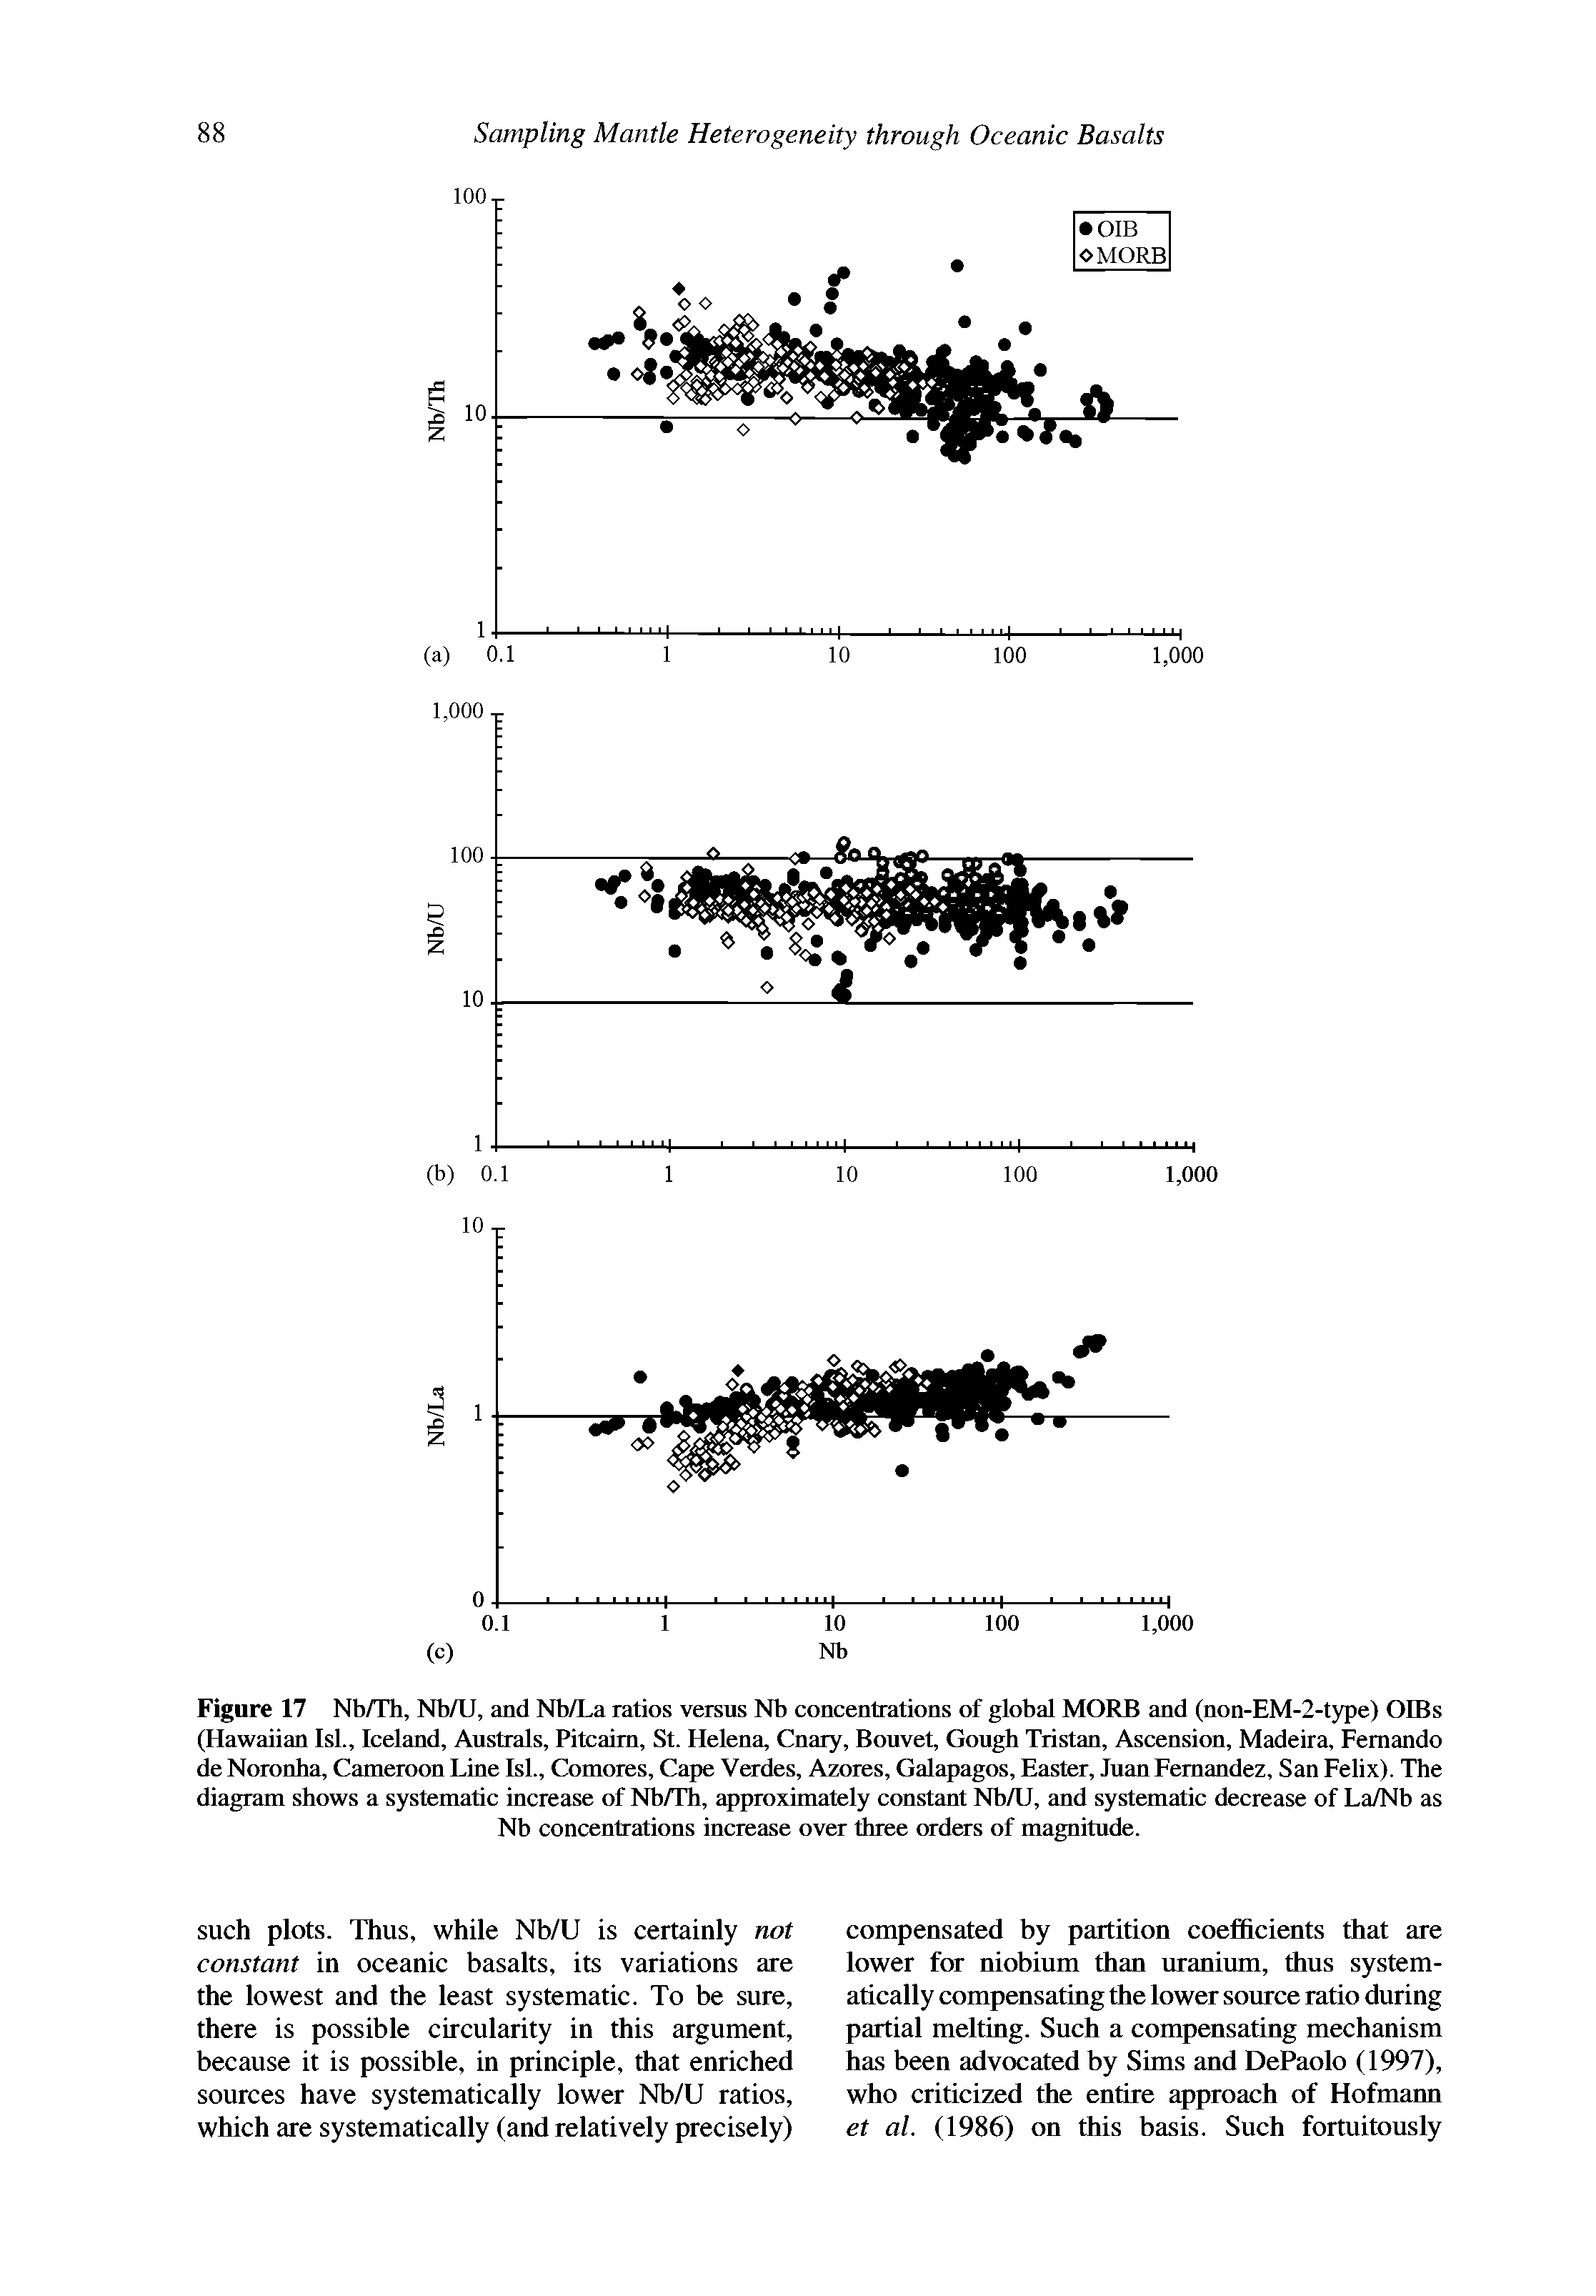 Figure 17 Nb/Th, Nb/U, and Nb/La ratios versus Nb concentrations of global MORE and (non-EM-2-type) OIBs (Hawaiian Isl., Iceland, Australs, Pitcairn, St. Helena, Cnary, Bouvet, Gough Tristan, Ascension, Madeira, Fernando de Noronha, Cameroon Line Isl., Comores, Cape Verdes, Azores, Galapagos, Easter, Juan Fernandez, San Felix). The diagram shows a systematic increase of Nb/Th, approximately constant Nb/U, and systematic decrease of La/Nb as Nb concentrations increase over three orders of magnitude.